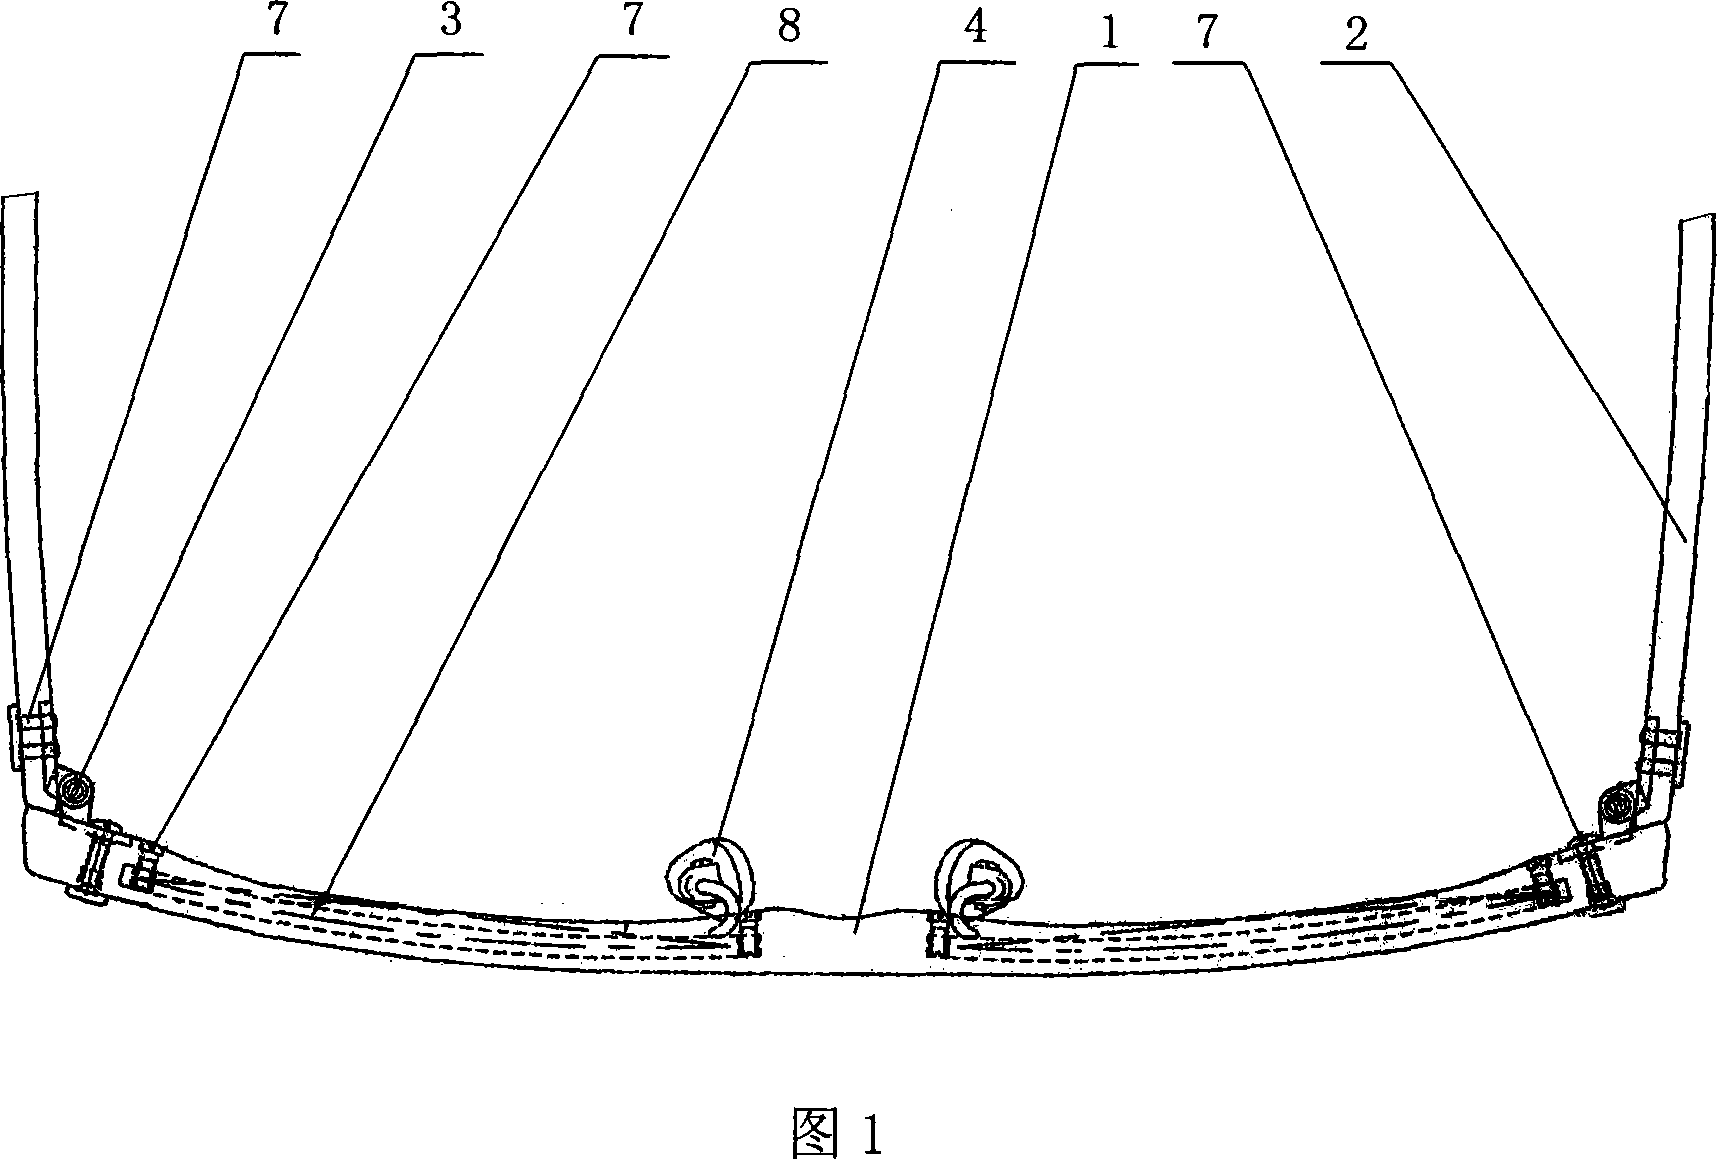 Process for producing glasses with wood or bamboo making glasses frame